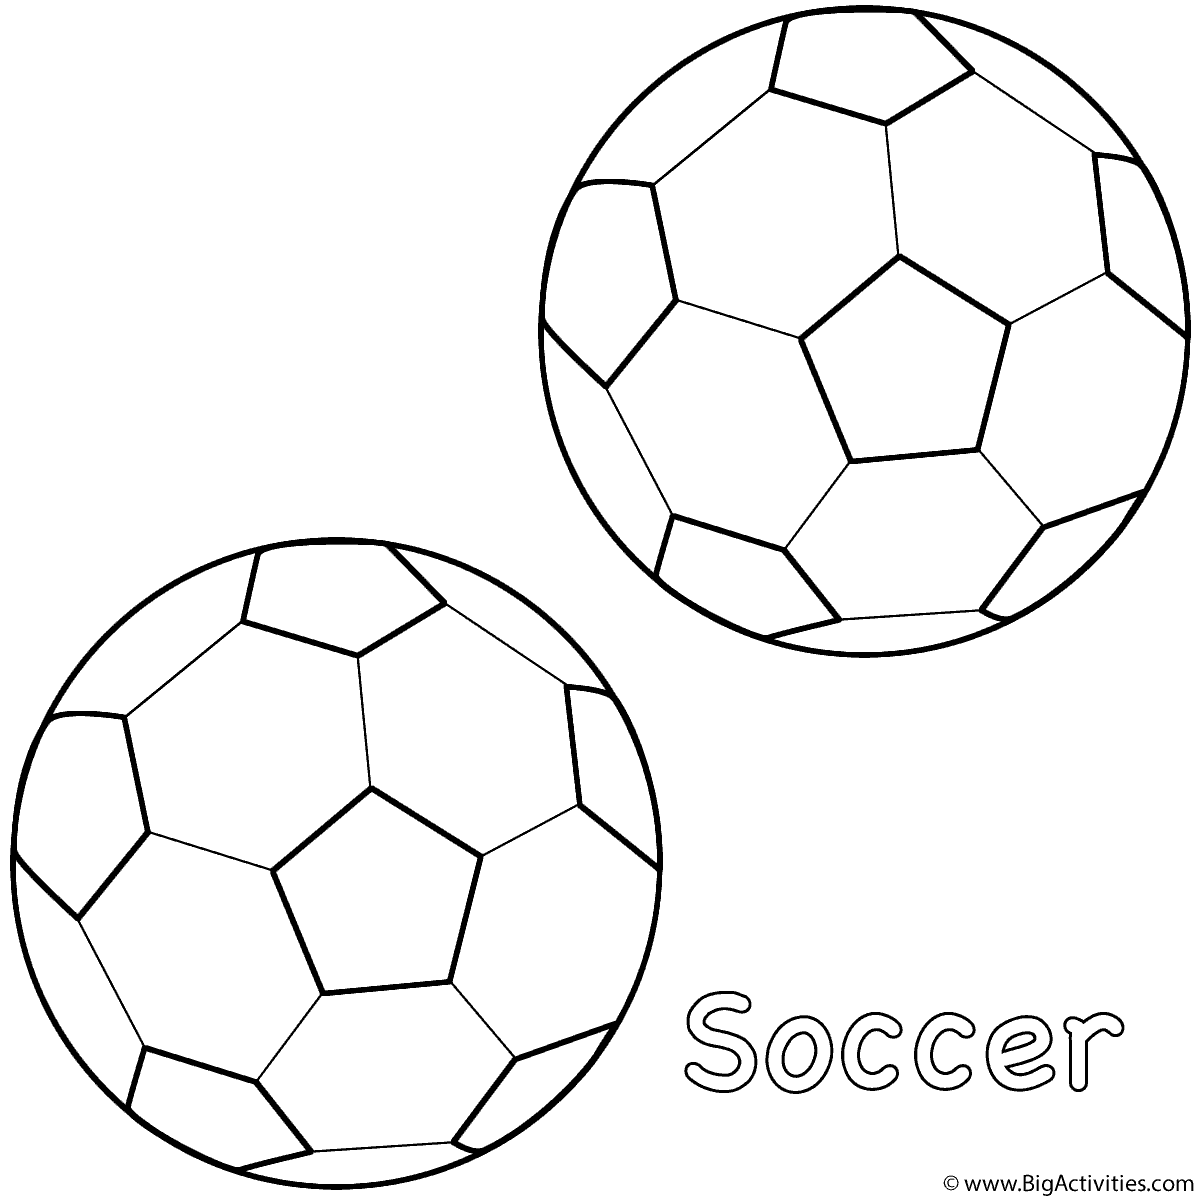 Ball Coloring Pages Printable at GetDrawings.com | Free for ...